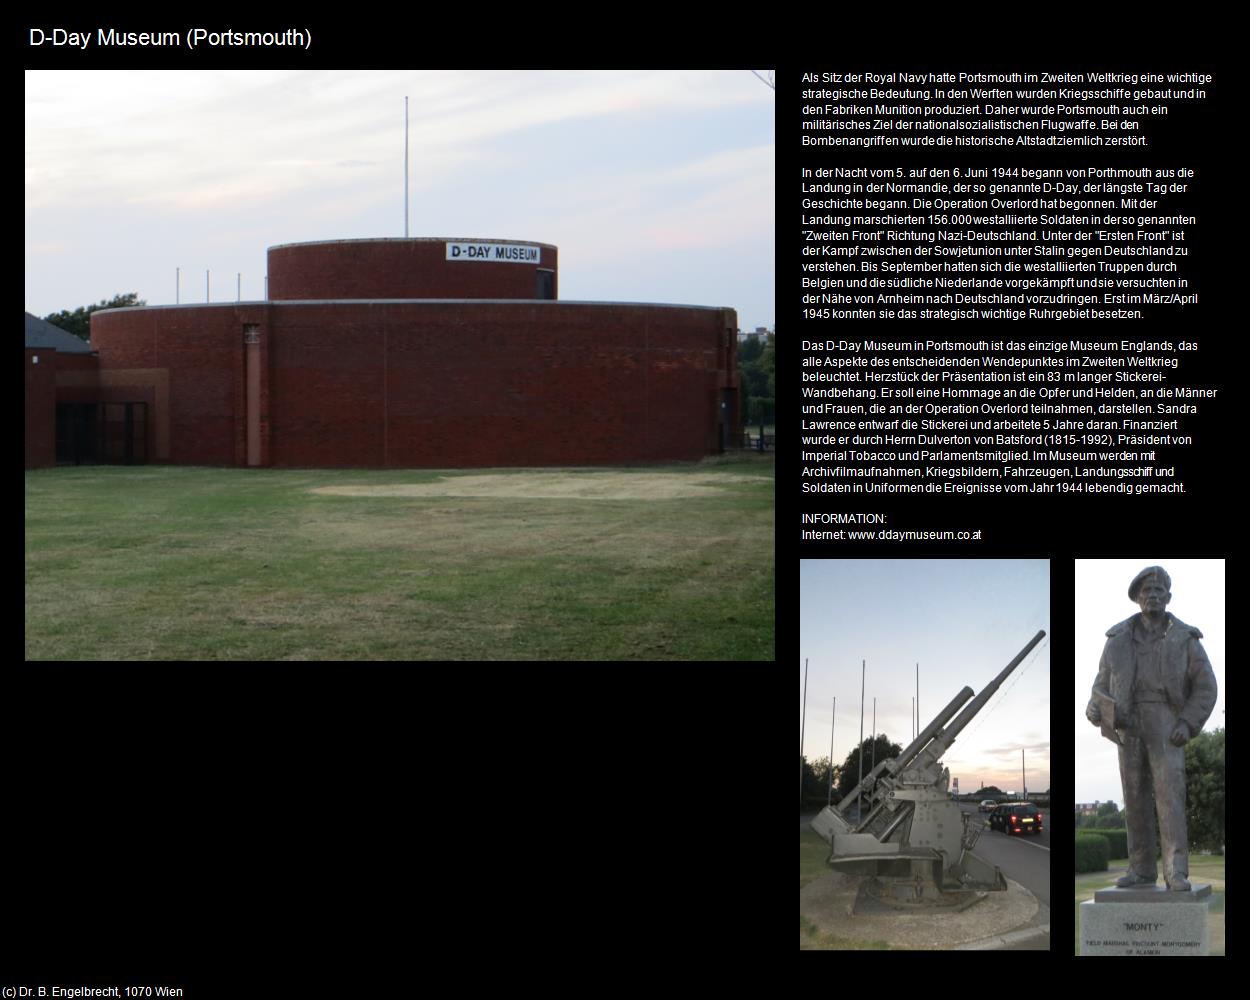 D-Day Museum (Portsmouth, England) in Kulturatlas-ENGLAND und WALES